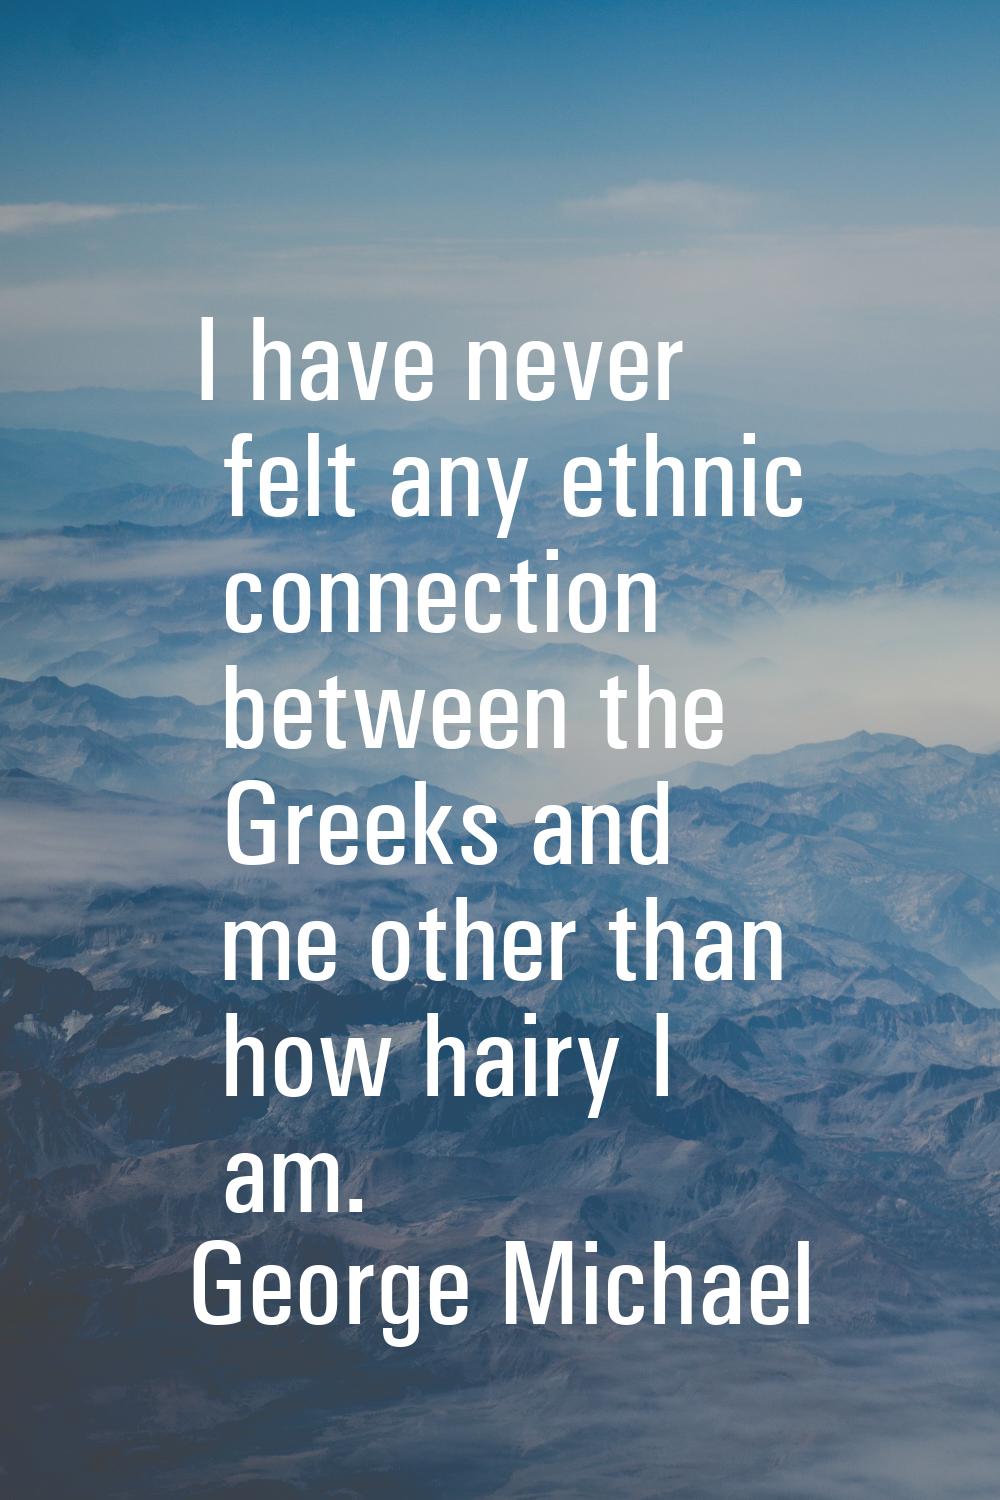 I have never felt any ethnic connection between the Greeks and me other than how hairy I am.